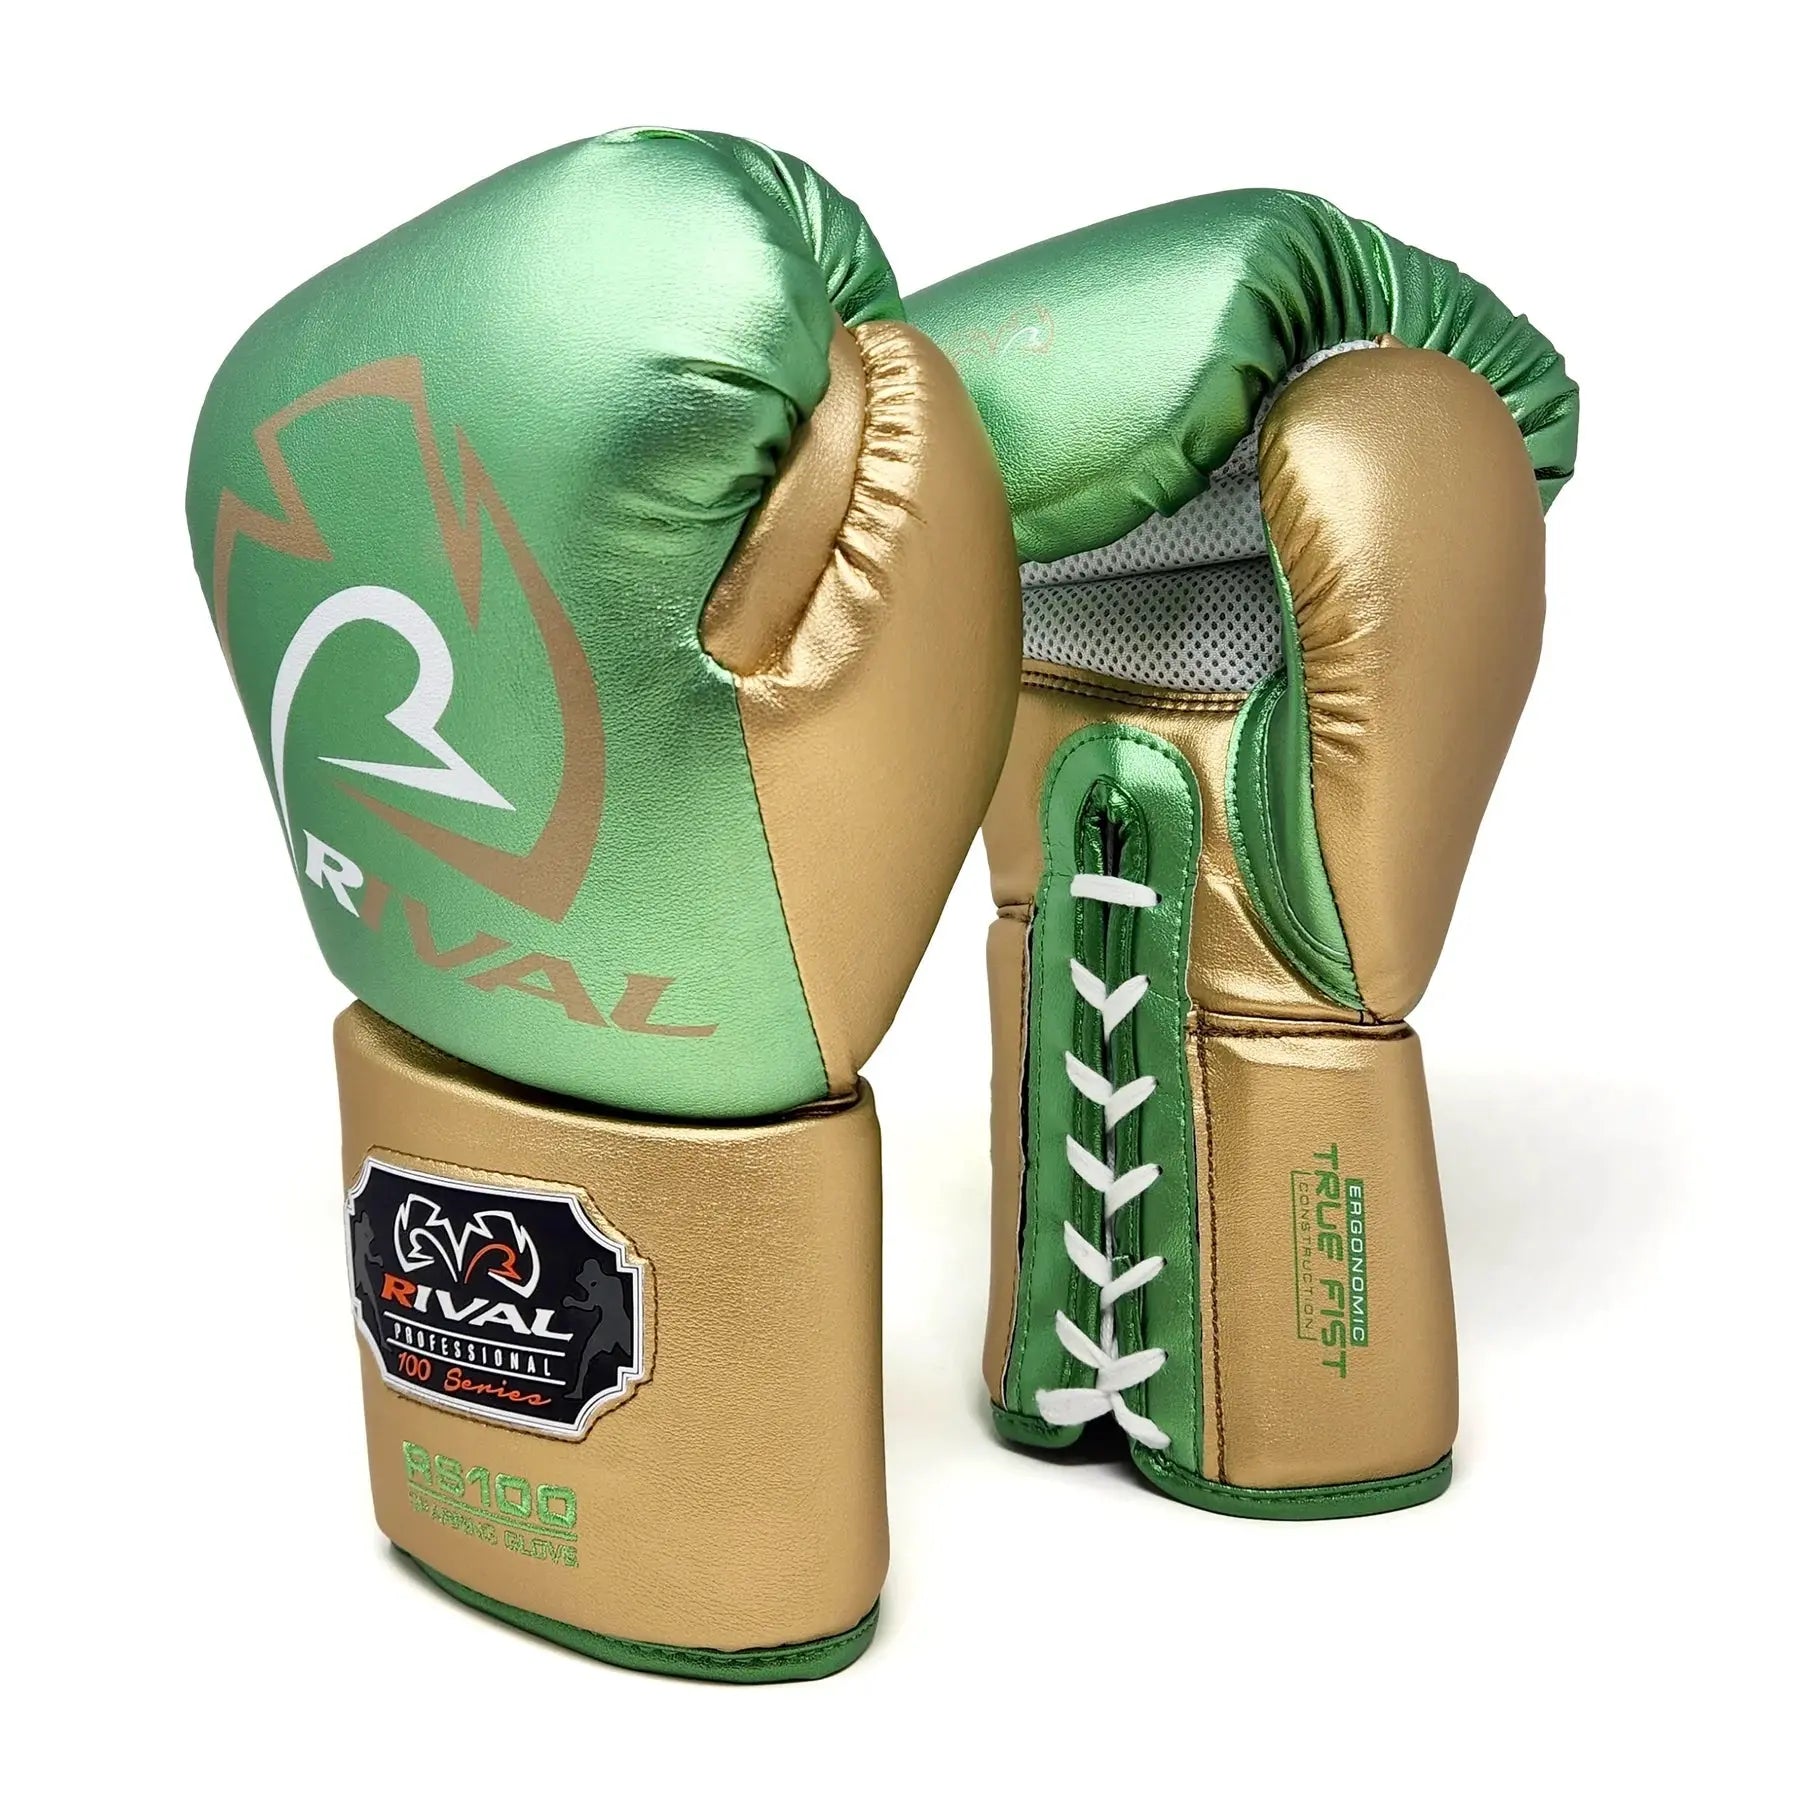 RIVAL Boxing RS100 Professional Lace-Up Sparring Gloves RIVAL